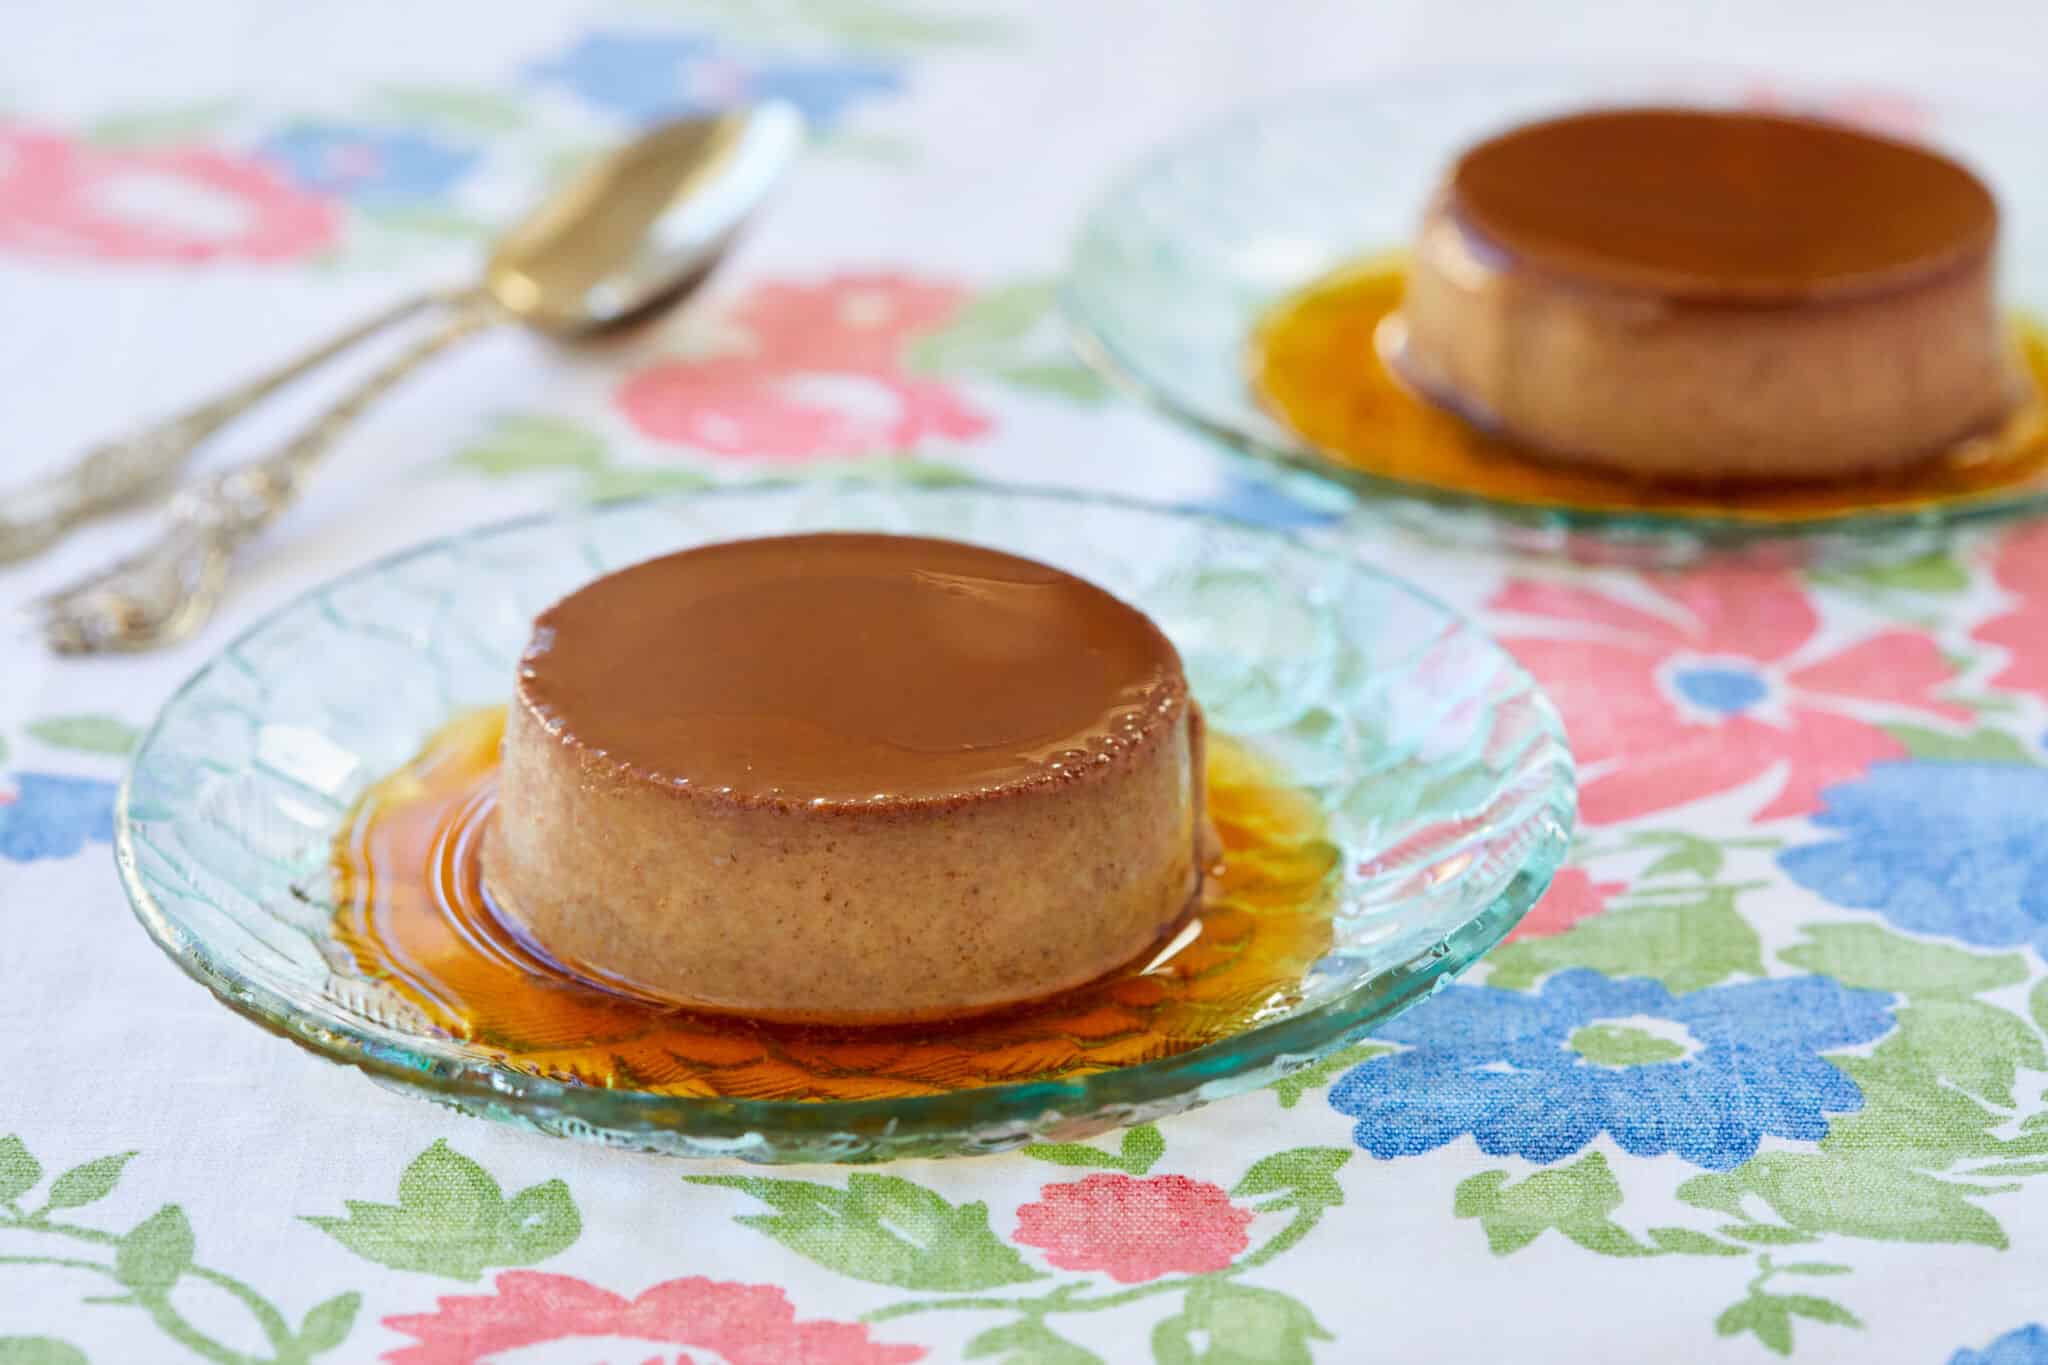 Two servings of chocolate Crème Caramel are served on glass dessert plates, with silky and tender custard topped with decadent sweet caramel.